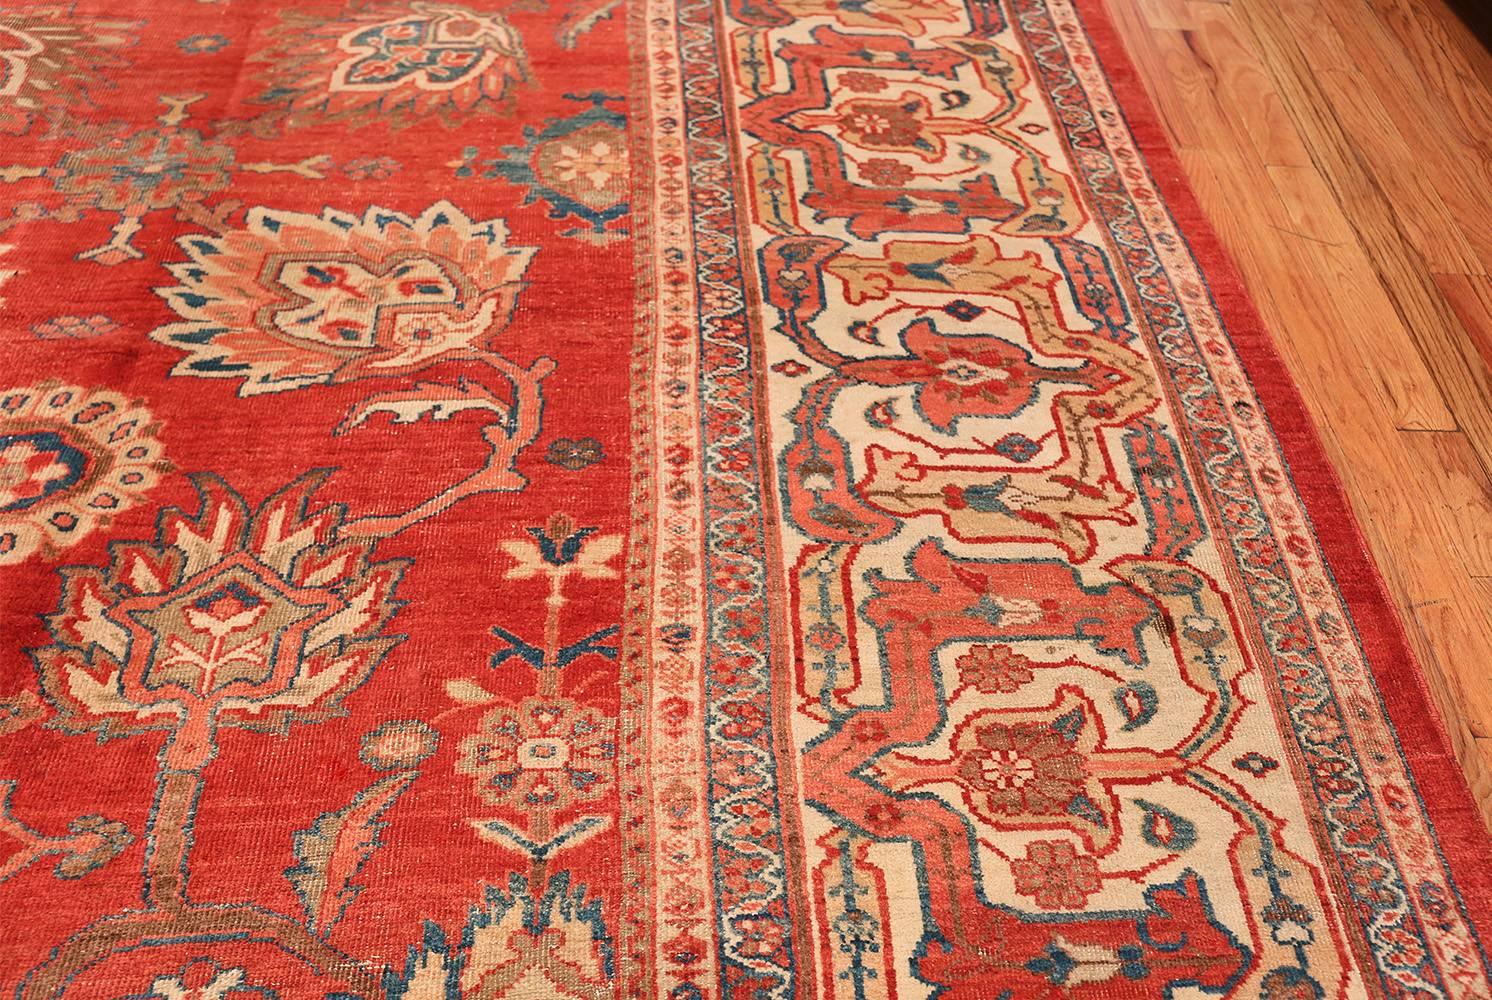 20th Century Largw Oversize Red Antique Persian Sultanabad Rug. Size: 14 ft x 21 ft